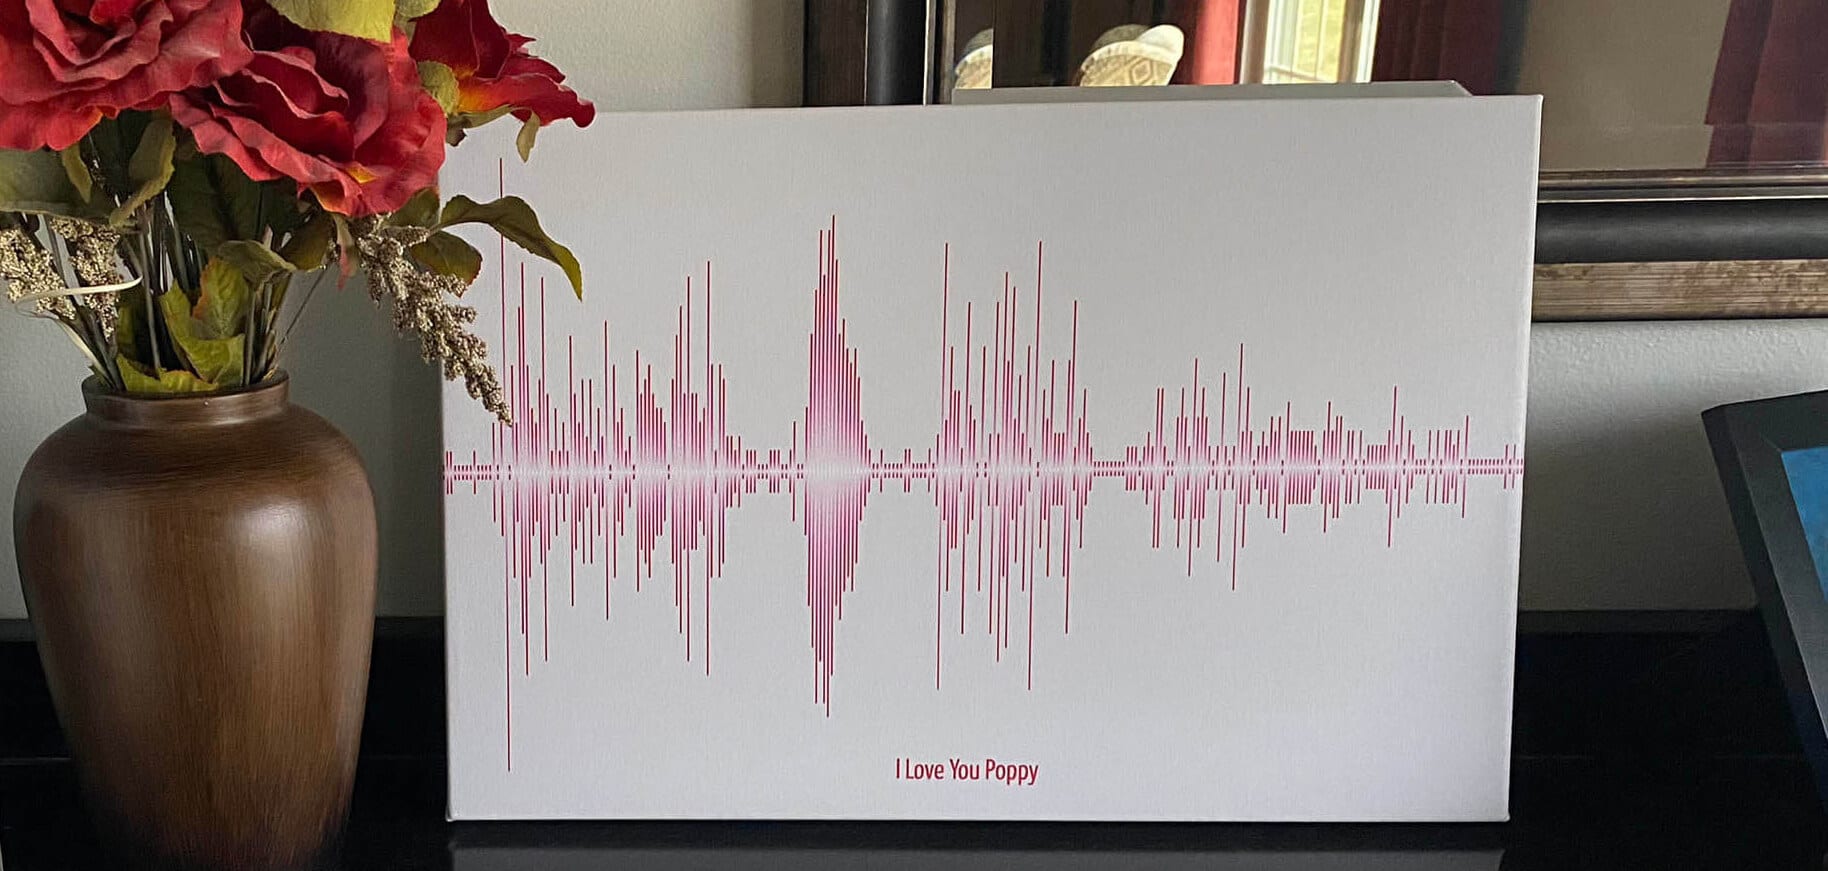 Soundwave Art ™ - The Sounds Of Your Life Turned Into Art